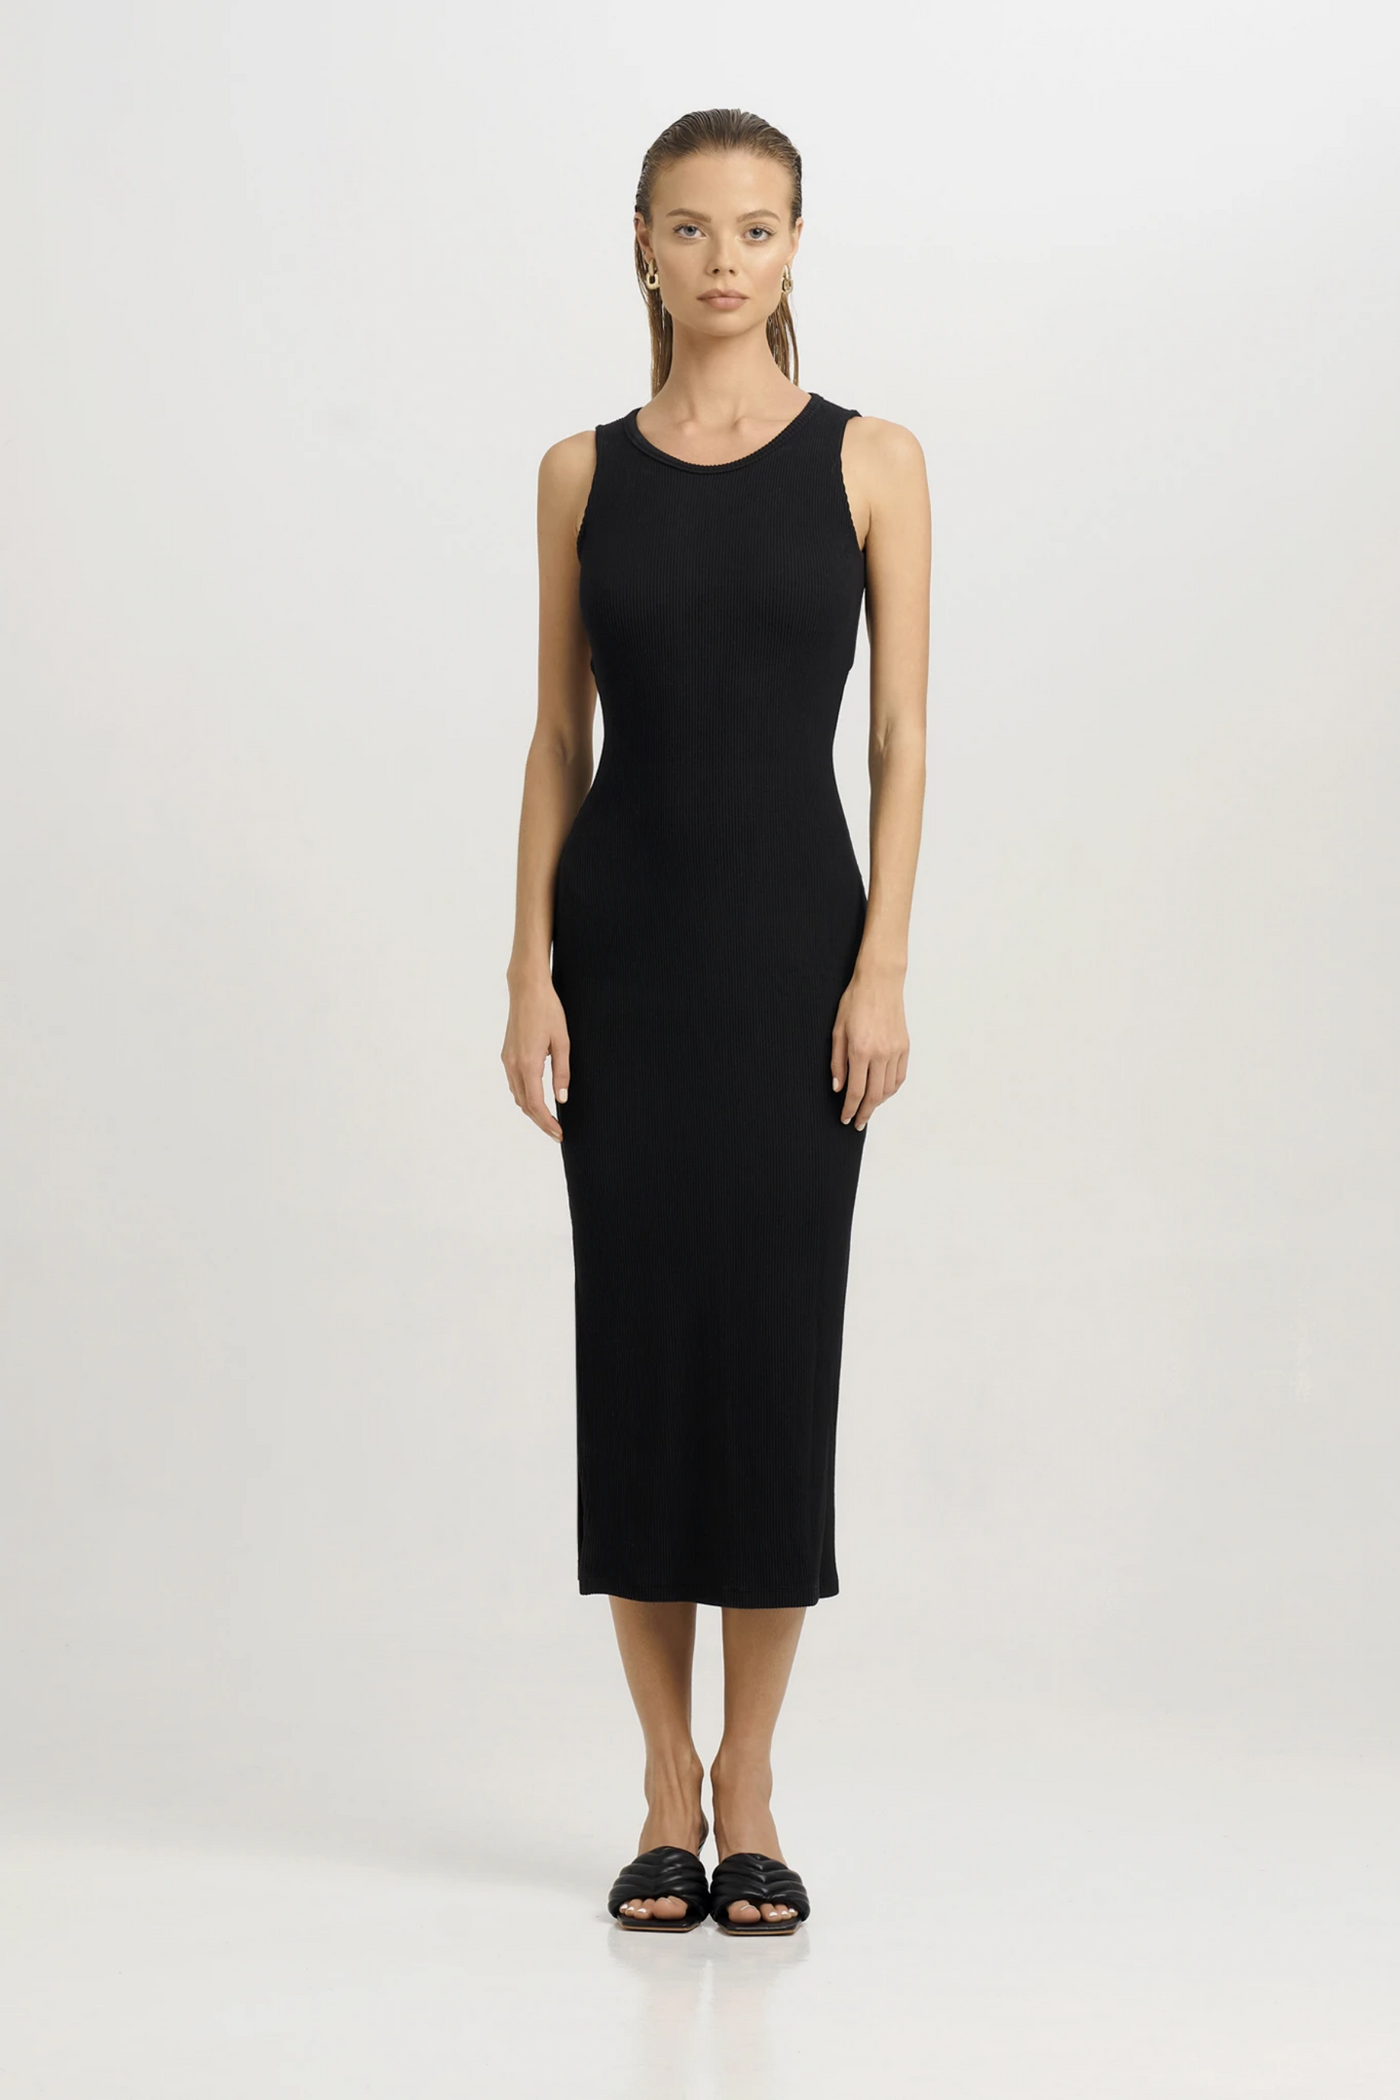 Sans Faff Stephanie Tie Back Dress, available on ZERRIN with free Singapore shipping